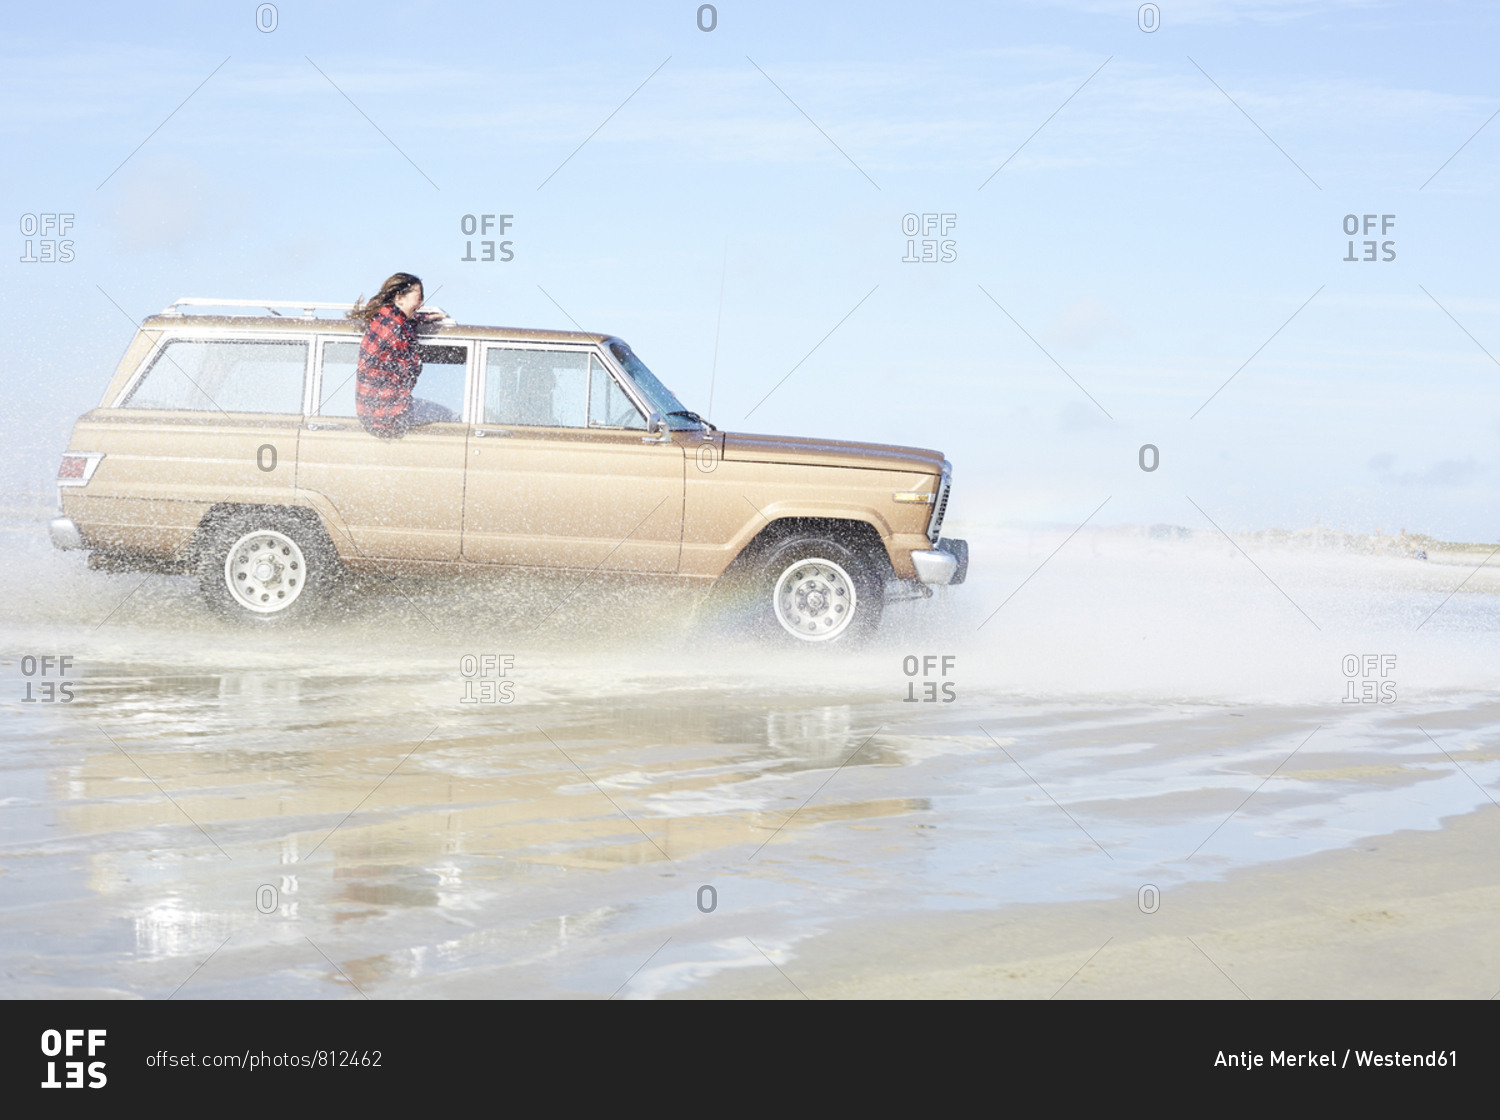 Germany- St Peter-Ording- girl leaning out of window of off-road vehicle driving through water on the beach